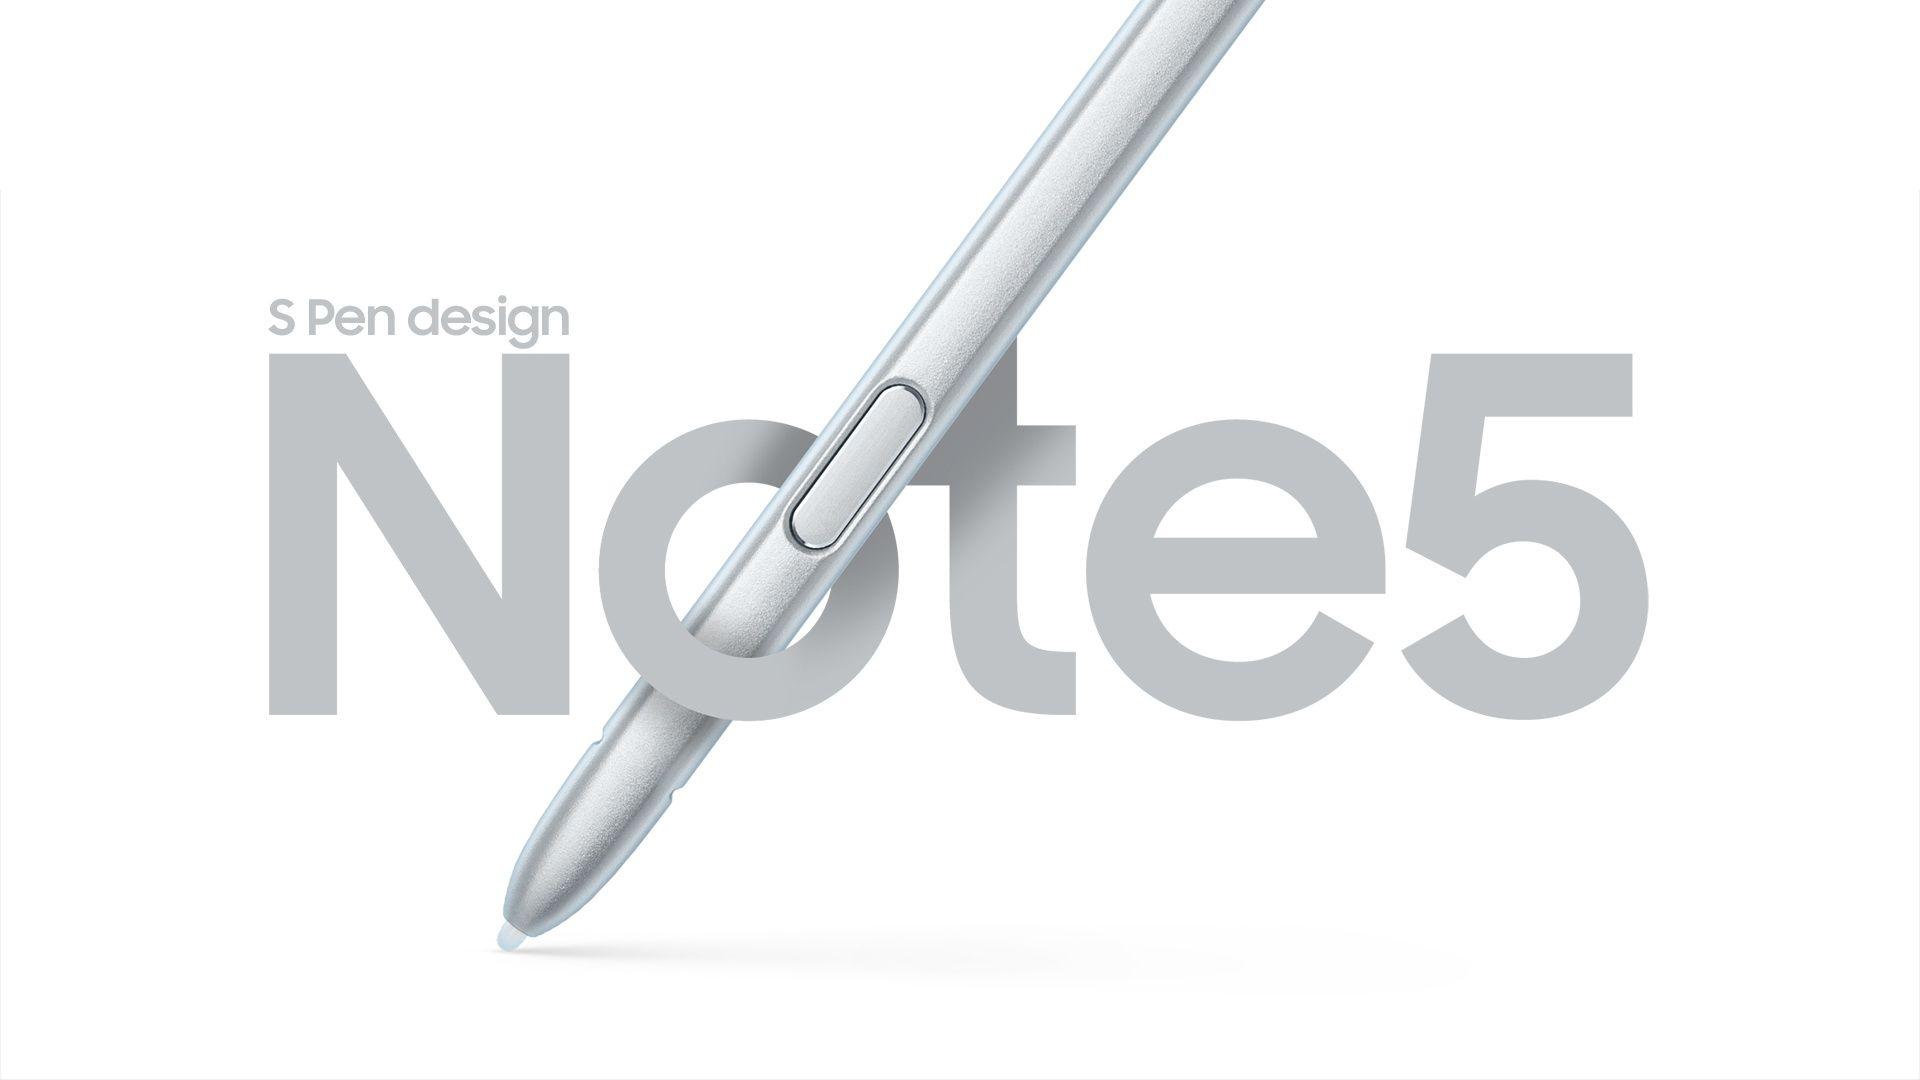 Samsung Galaxy Note 5 Logo - Samsung Galaxy Note 5 Will Have MicroSD Card Slot, But There's a ...